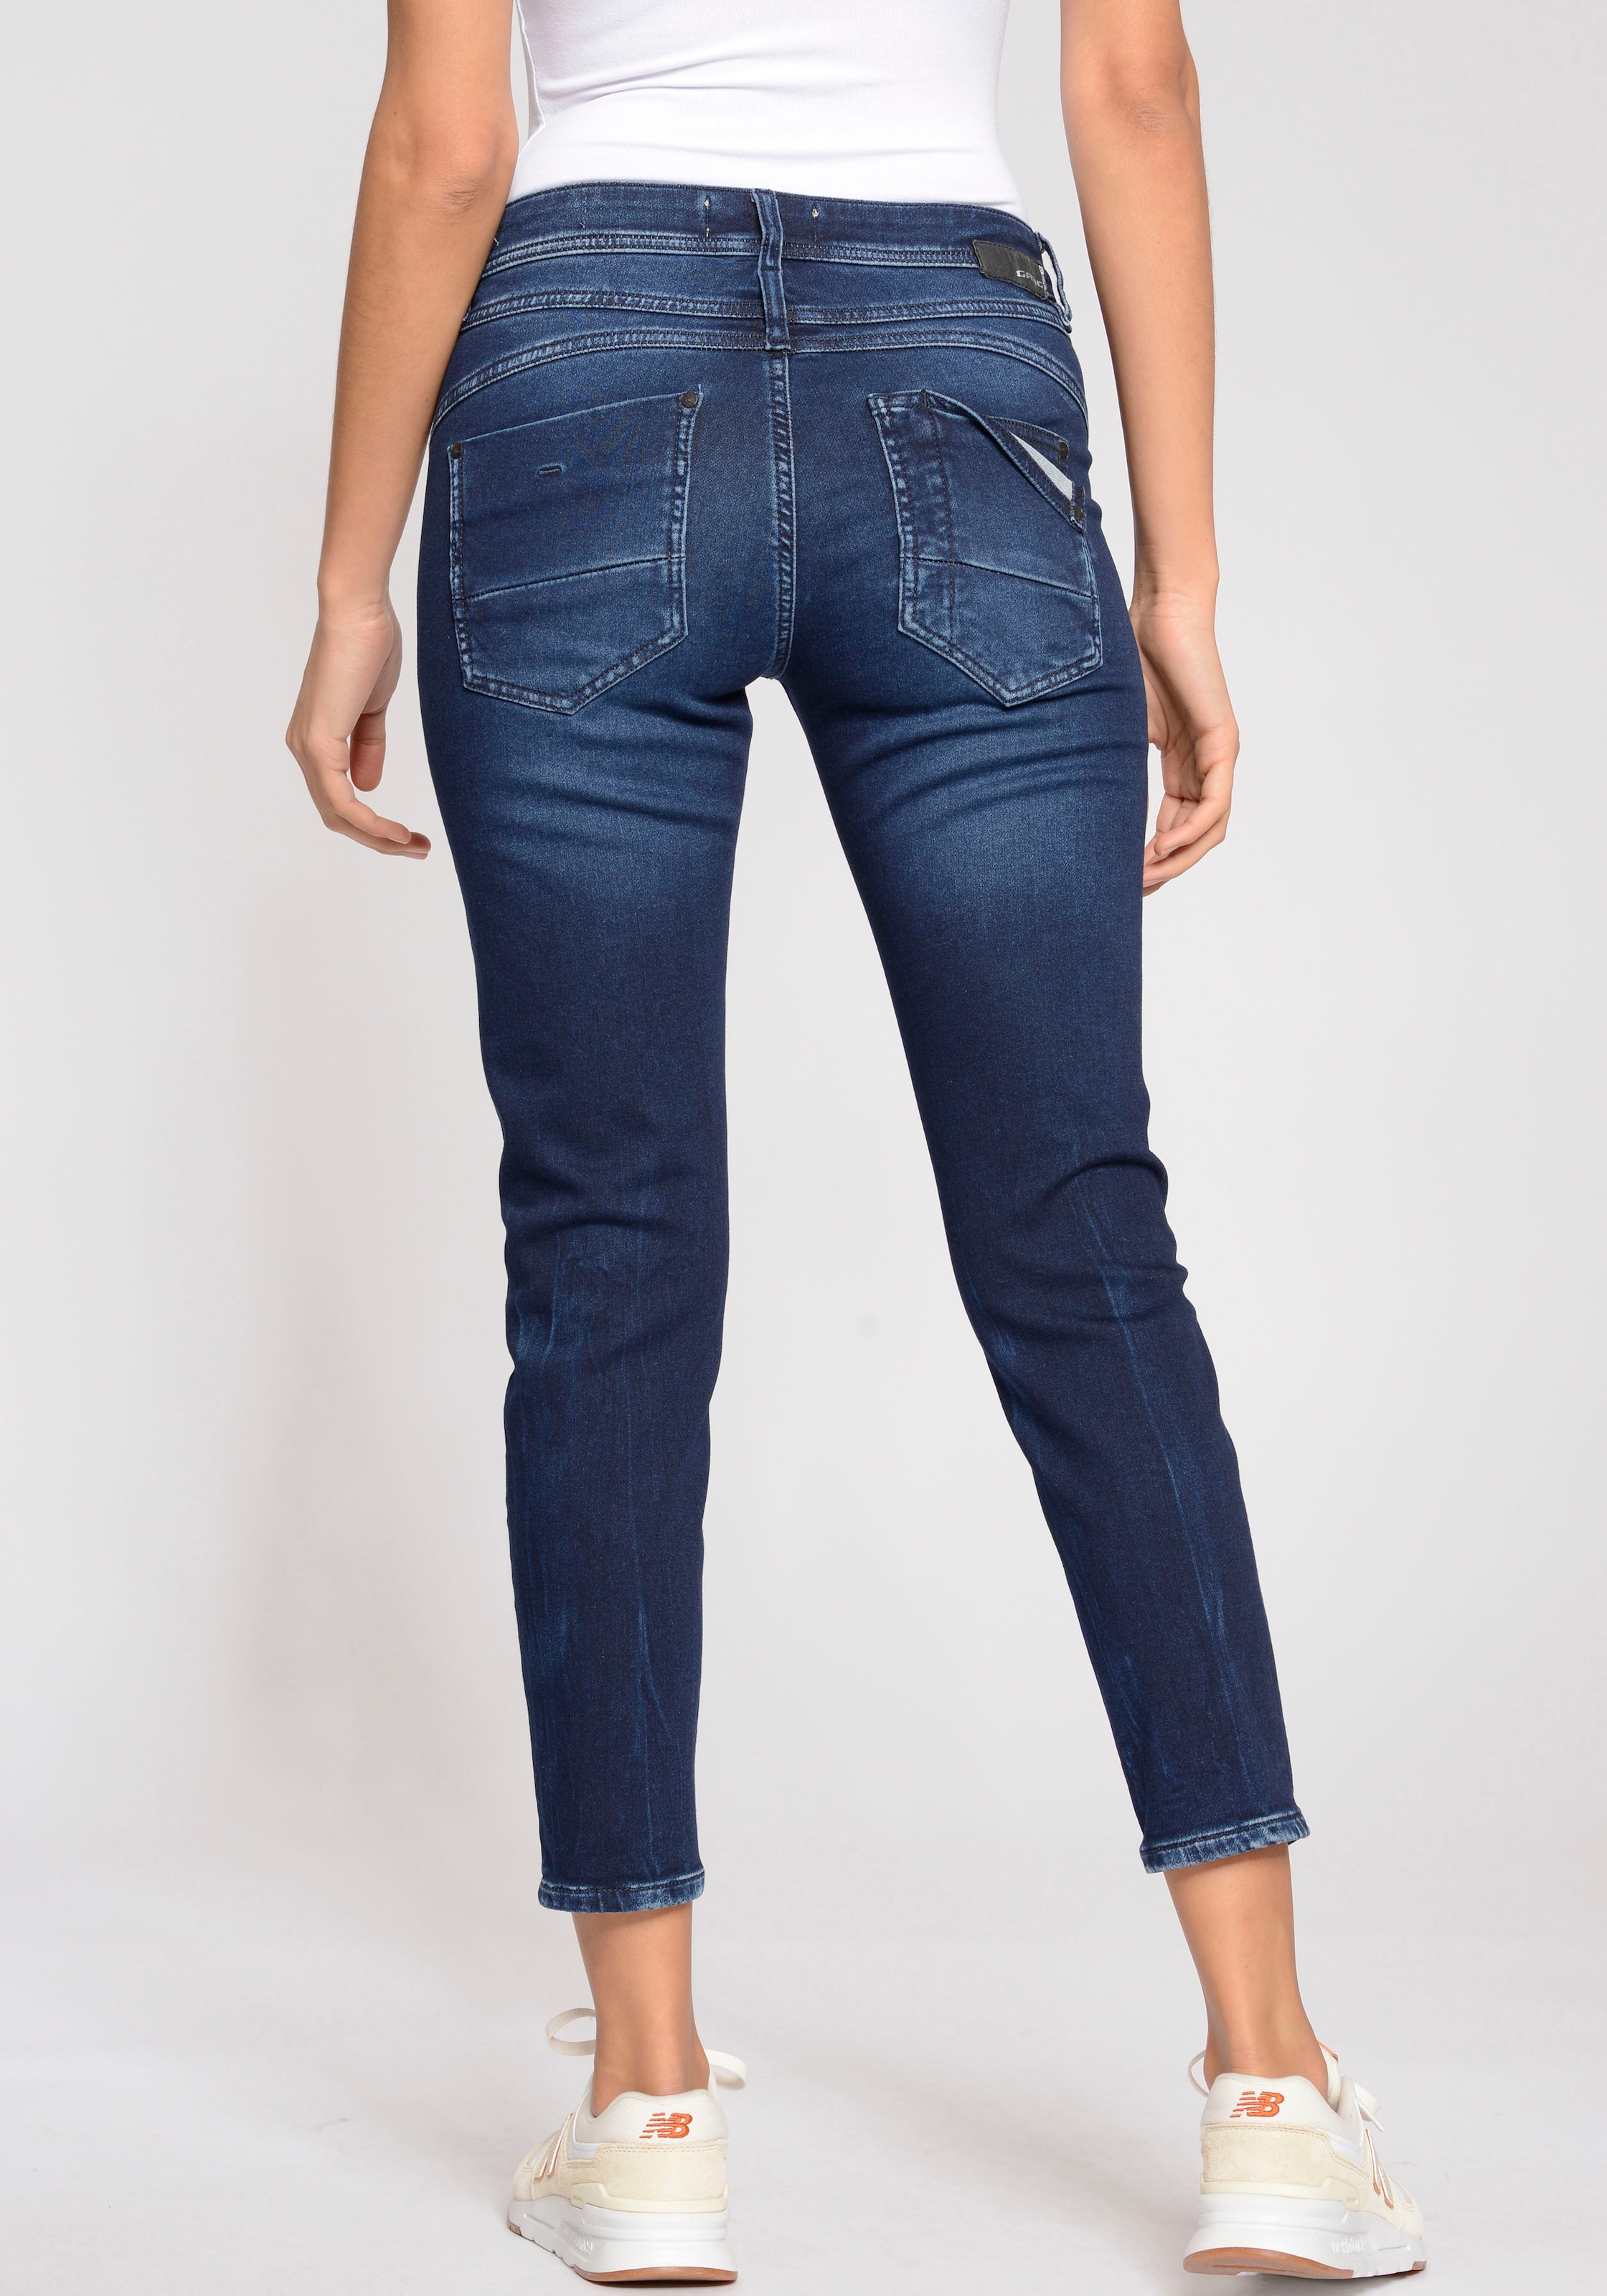 Relax-fit-Jeans bei GANG kaufen OTTO »94Amelie Cropped«